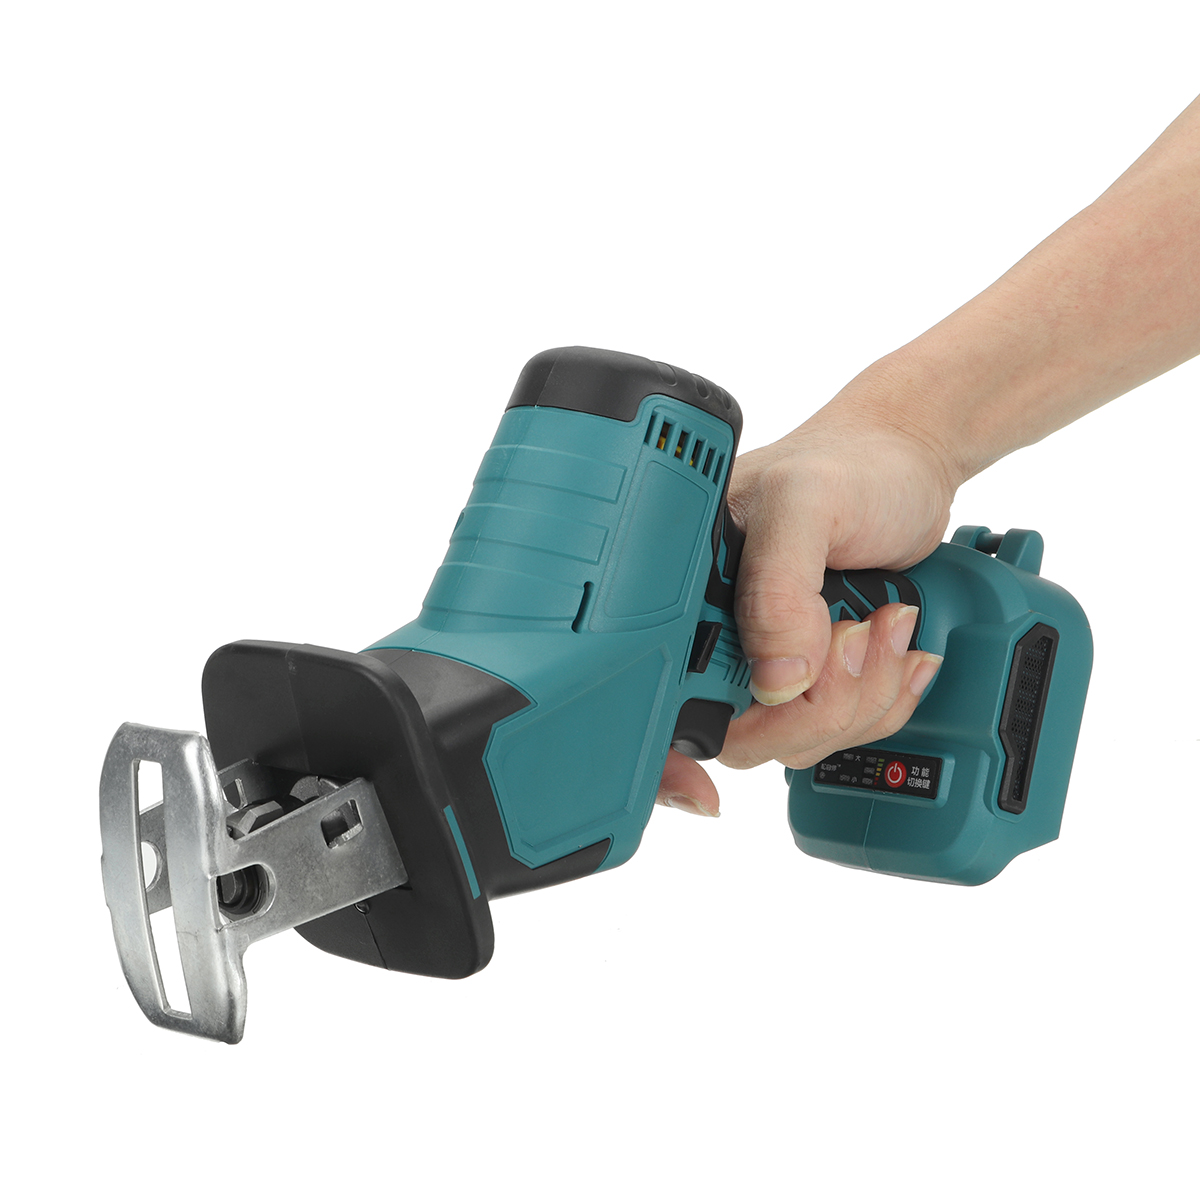 Rechargeable-Brushless-Reciprocating-Saw-Electric-Saw-For-Makita-Battery-Woodworking-Cutting-Tool-1886188-5